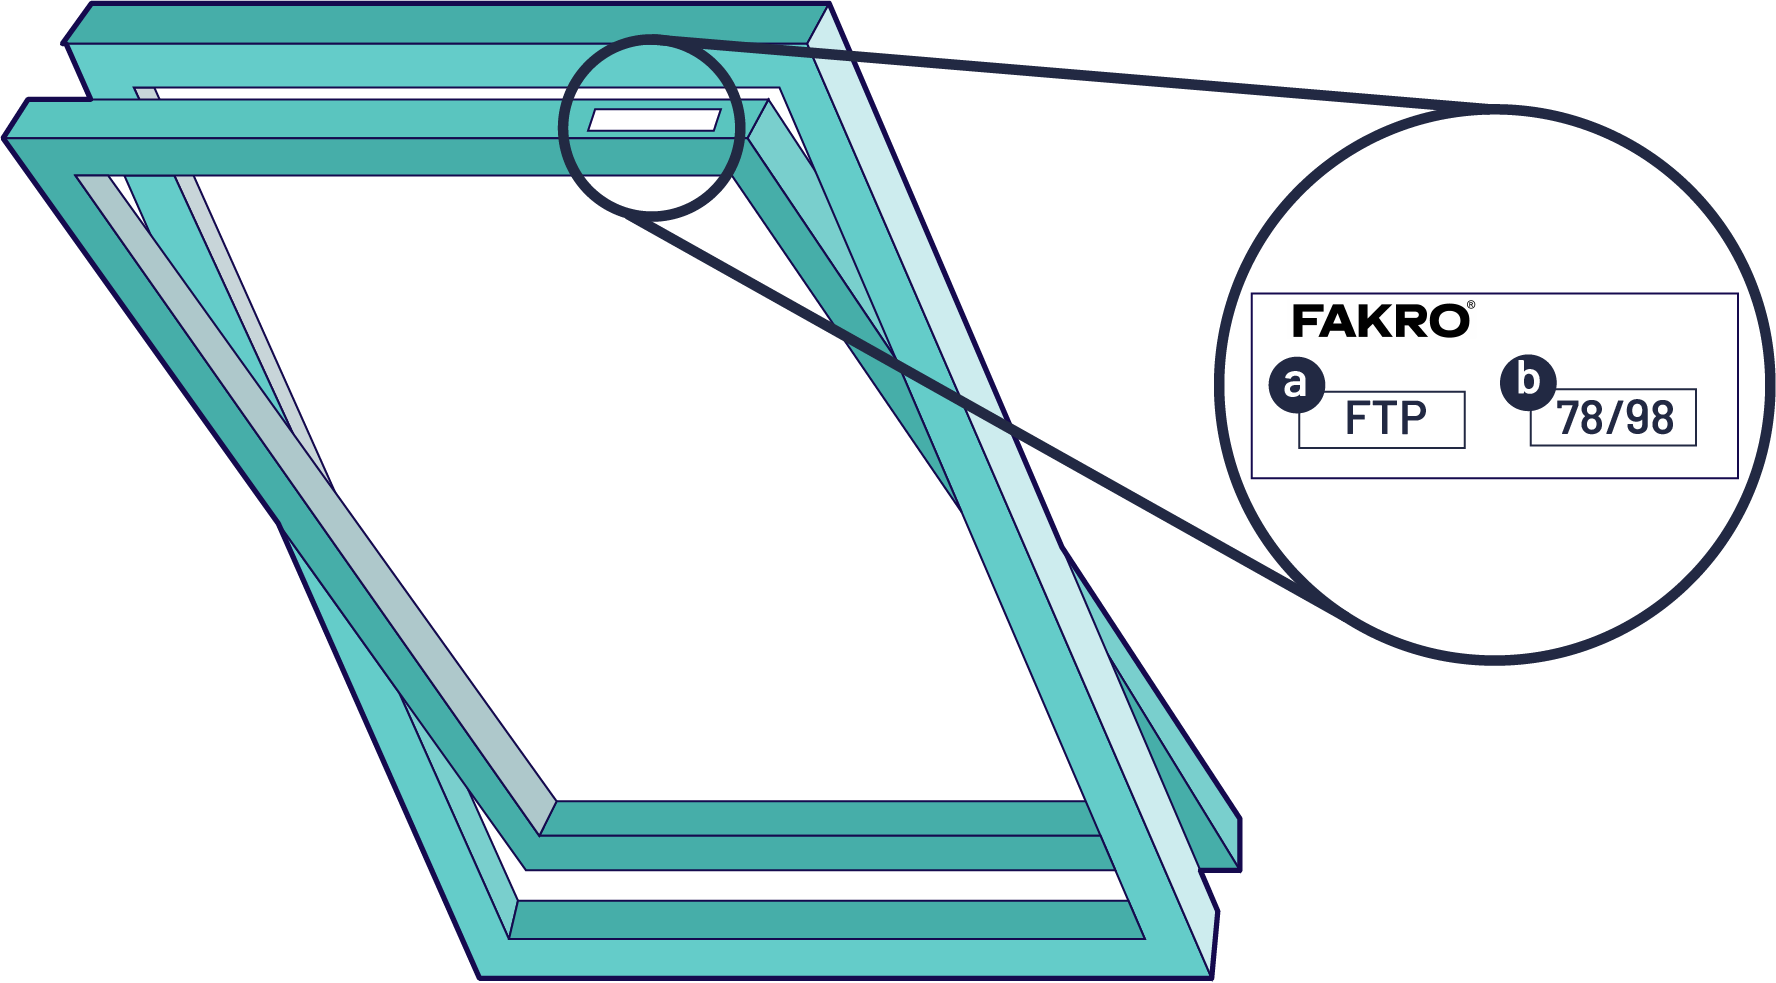 A skylight window showing where to find your Fakro code